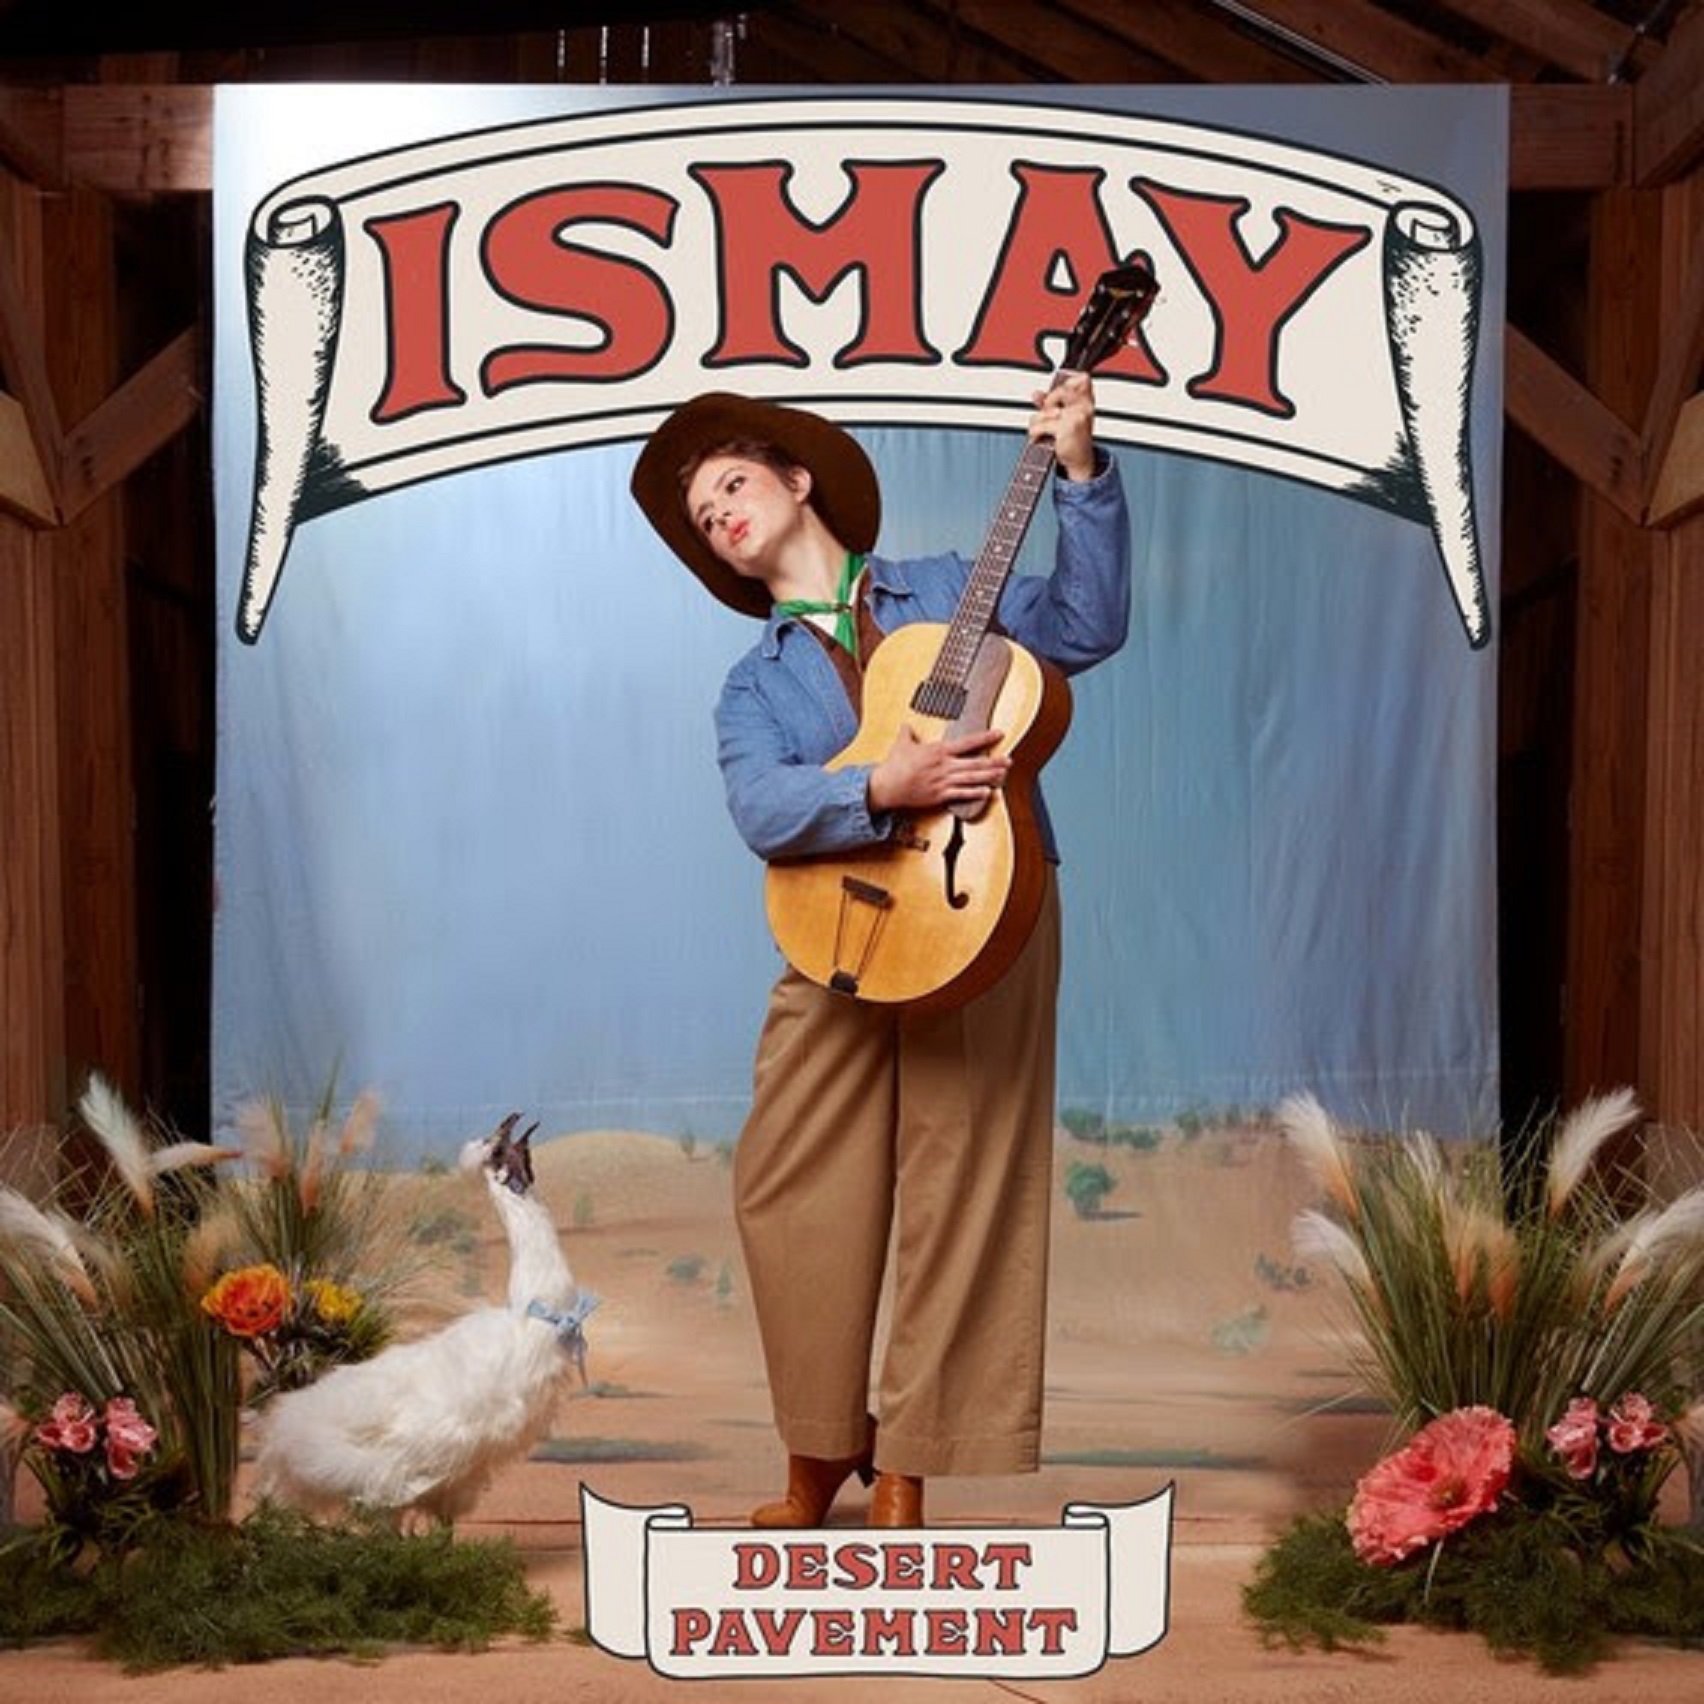 ISMAY Announces Their Second Album DESERT PAVEMENT, Out January 26th